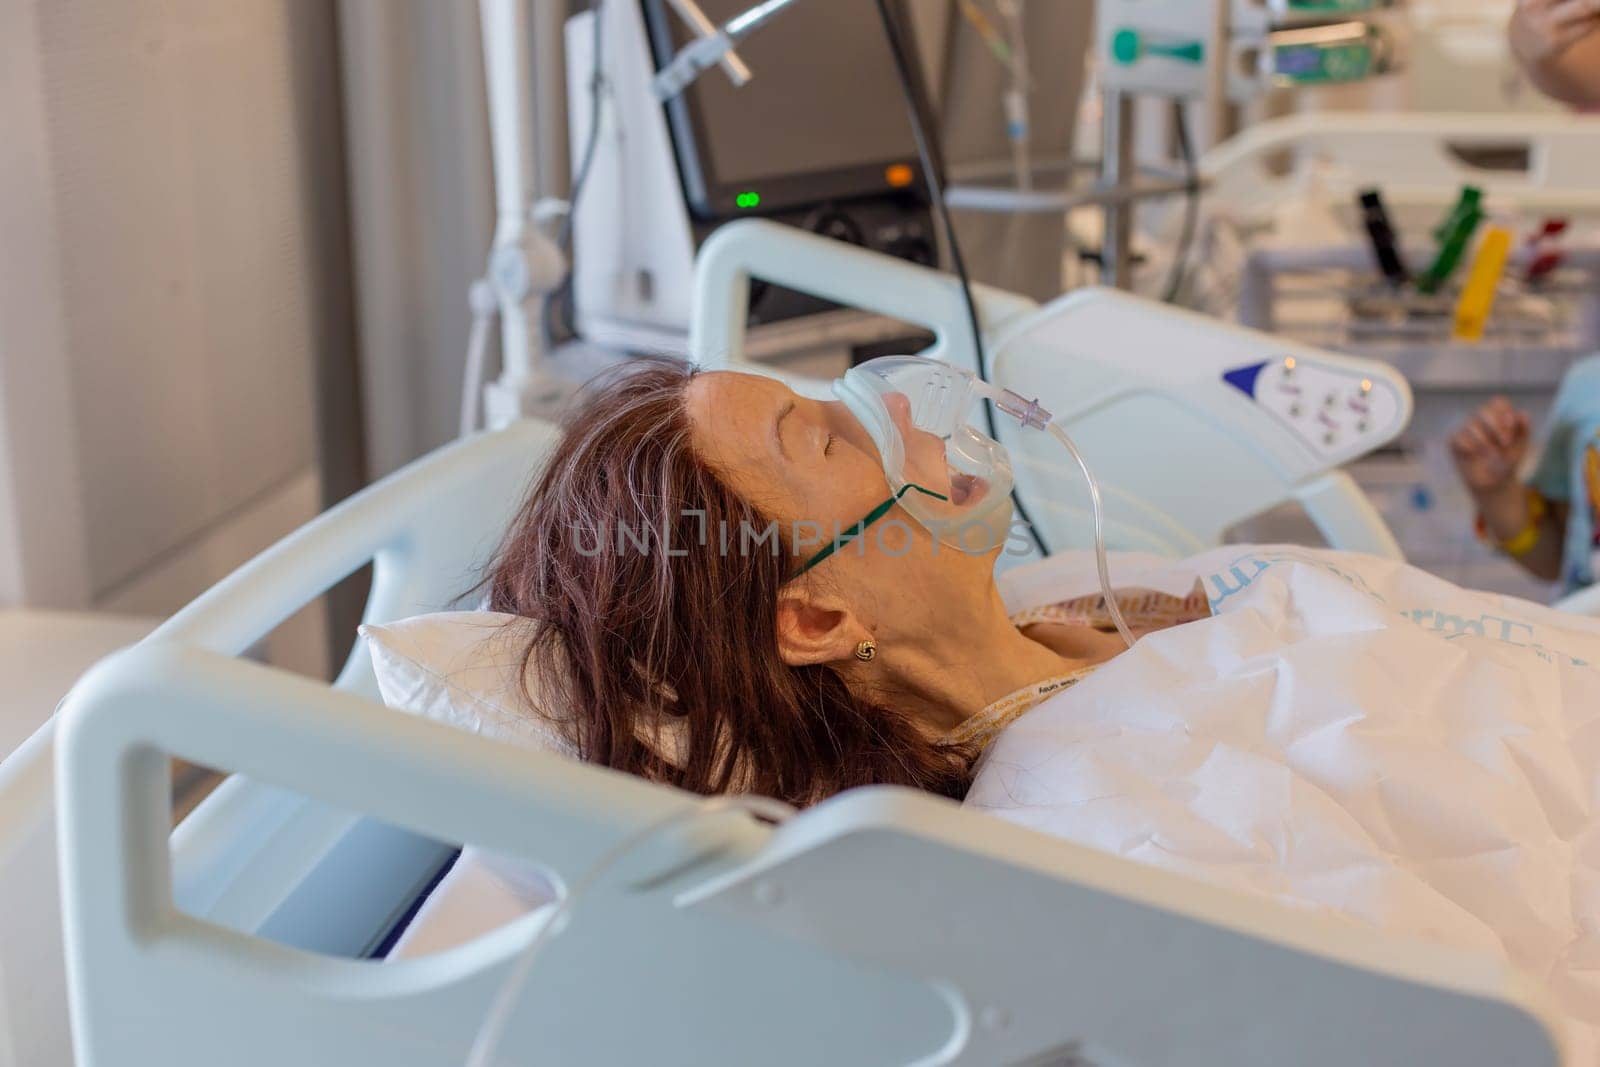 Moscow, Moscow region, Russia - 03.09.2023:Training educational realistic medical mannequin of a senior woman lying on a hospital bed.